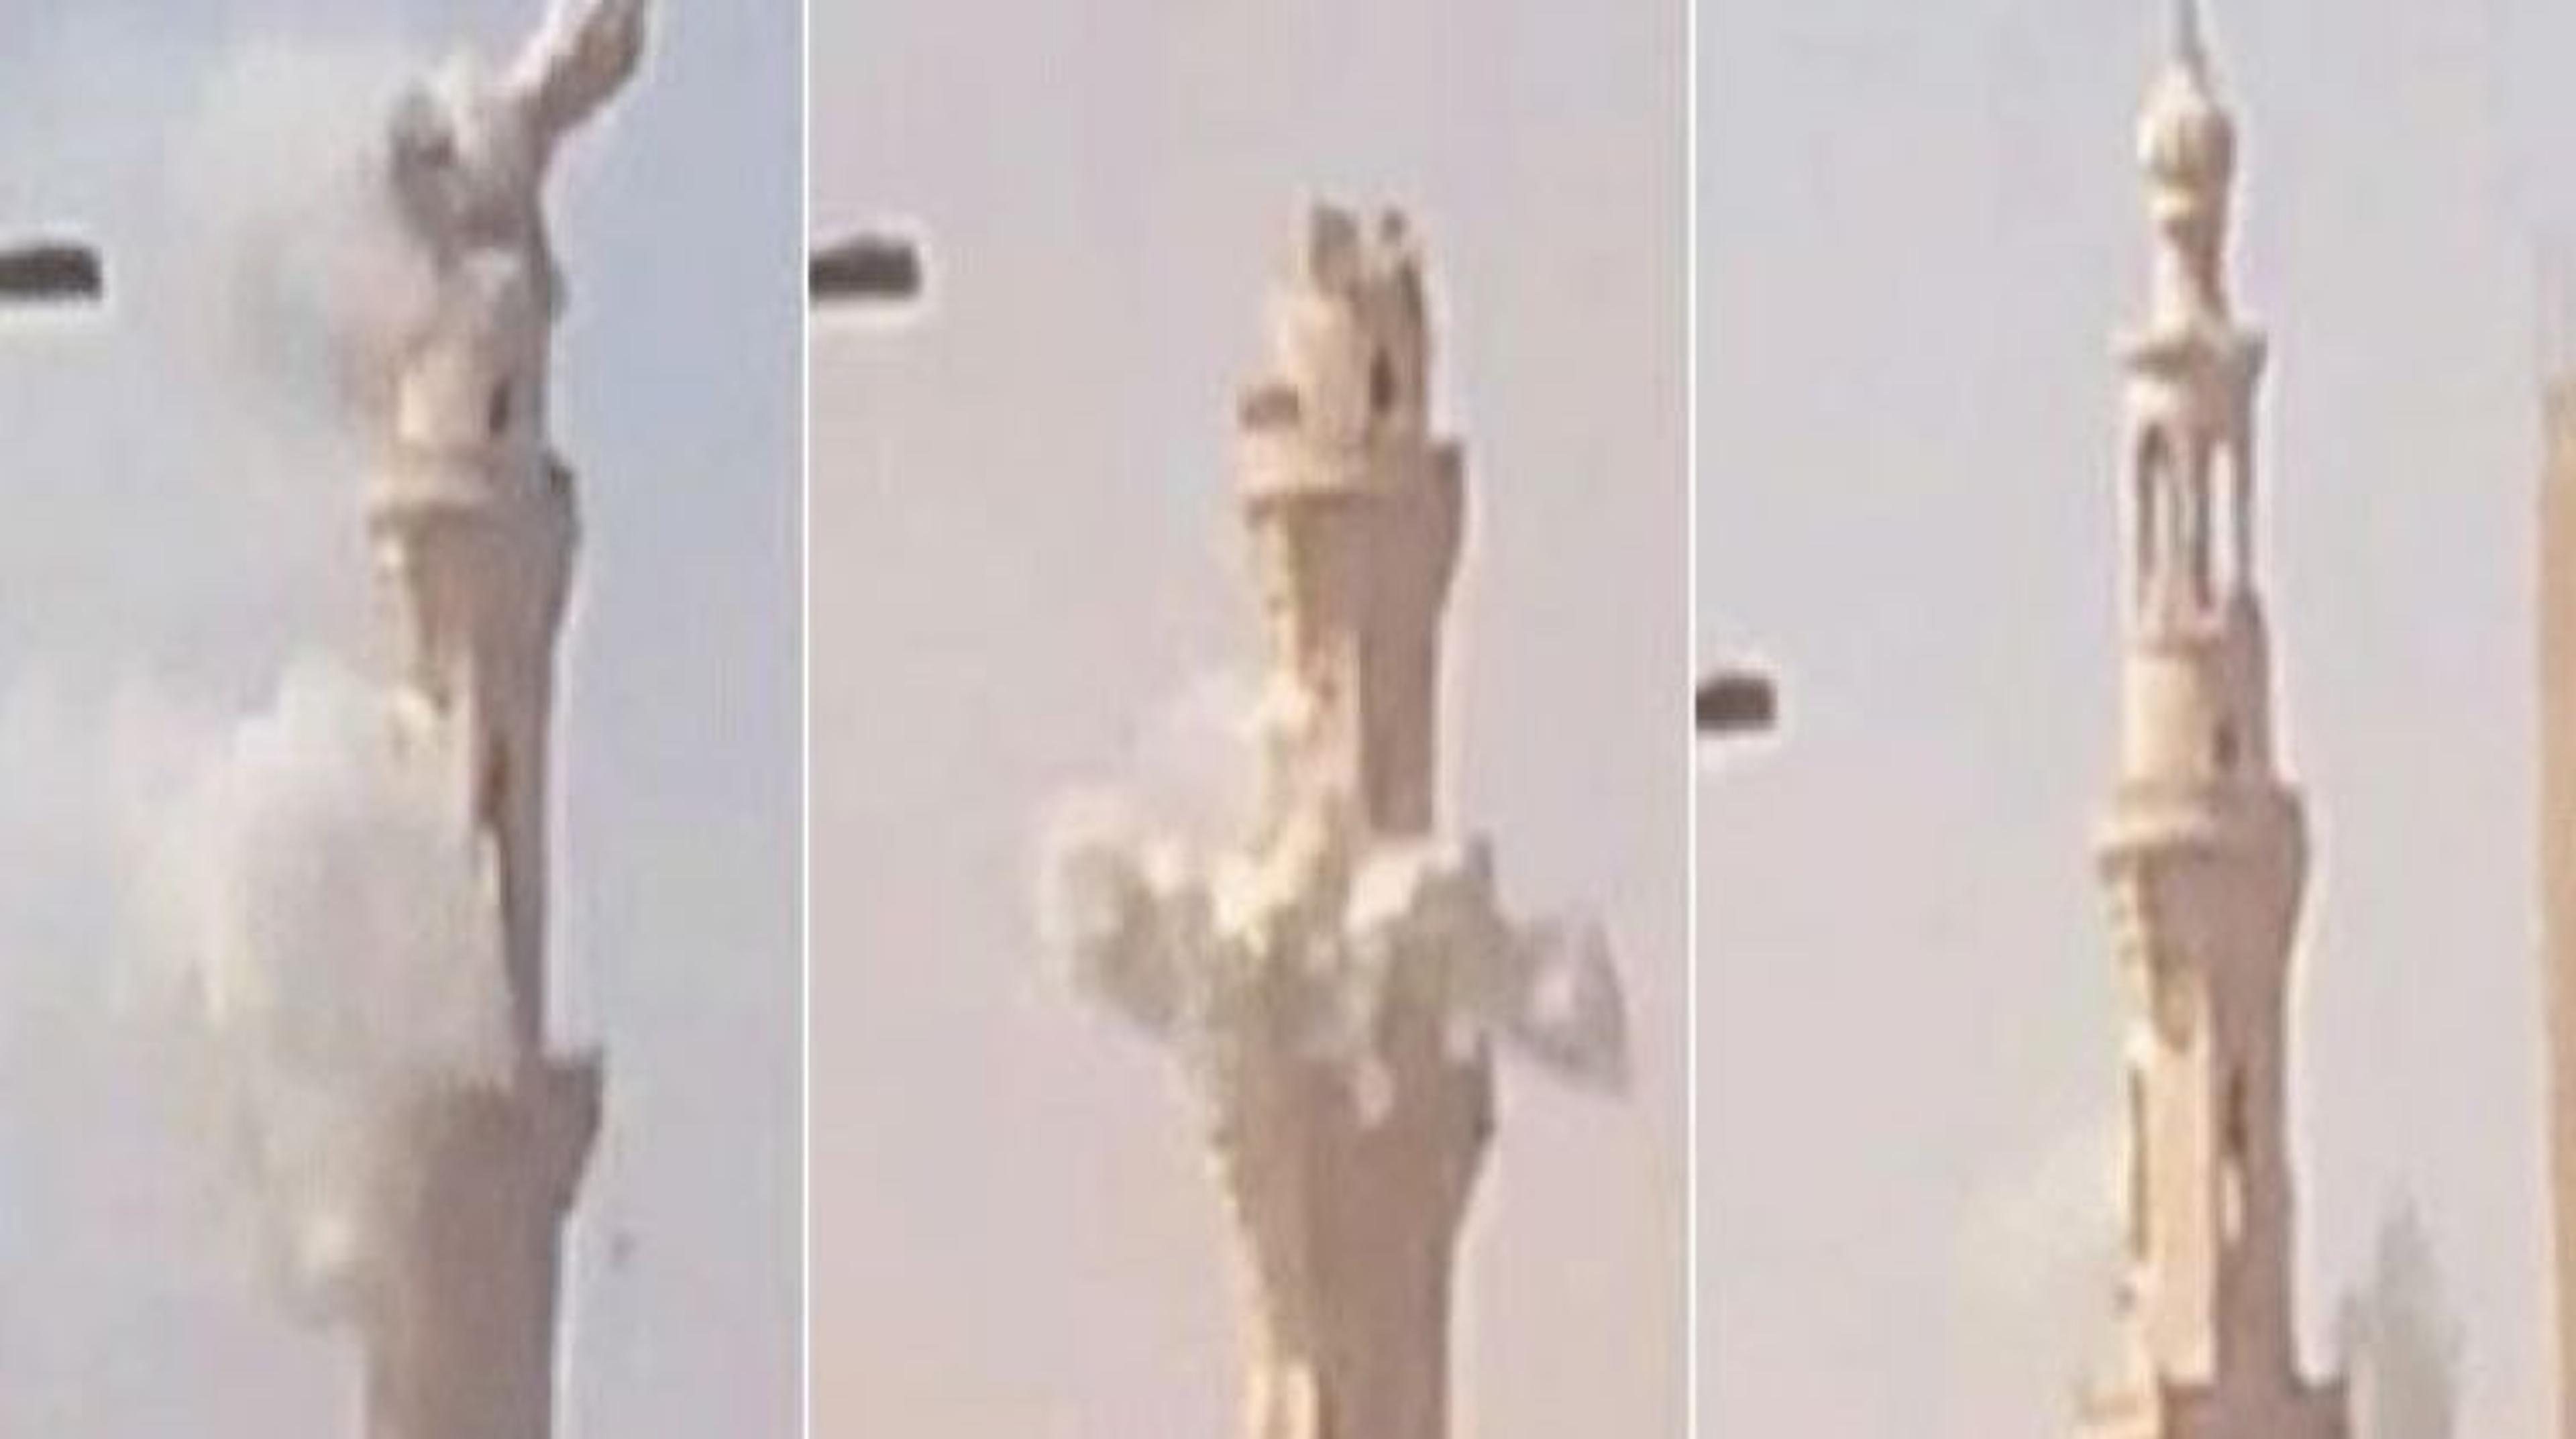 The fall of the minaret of Othman Mosque